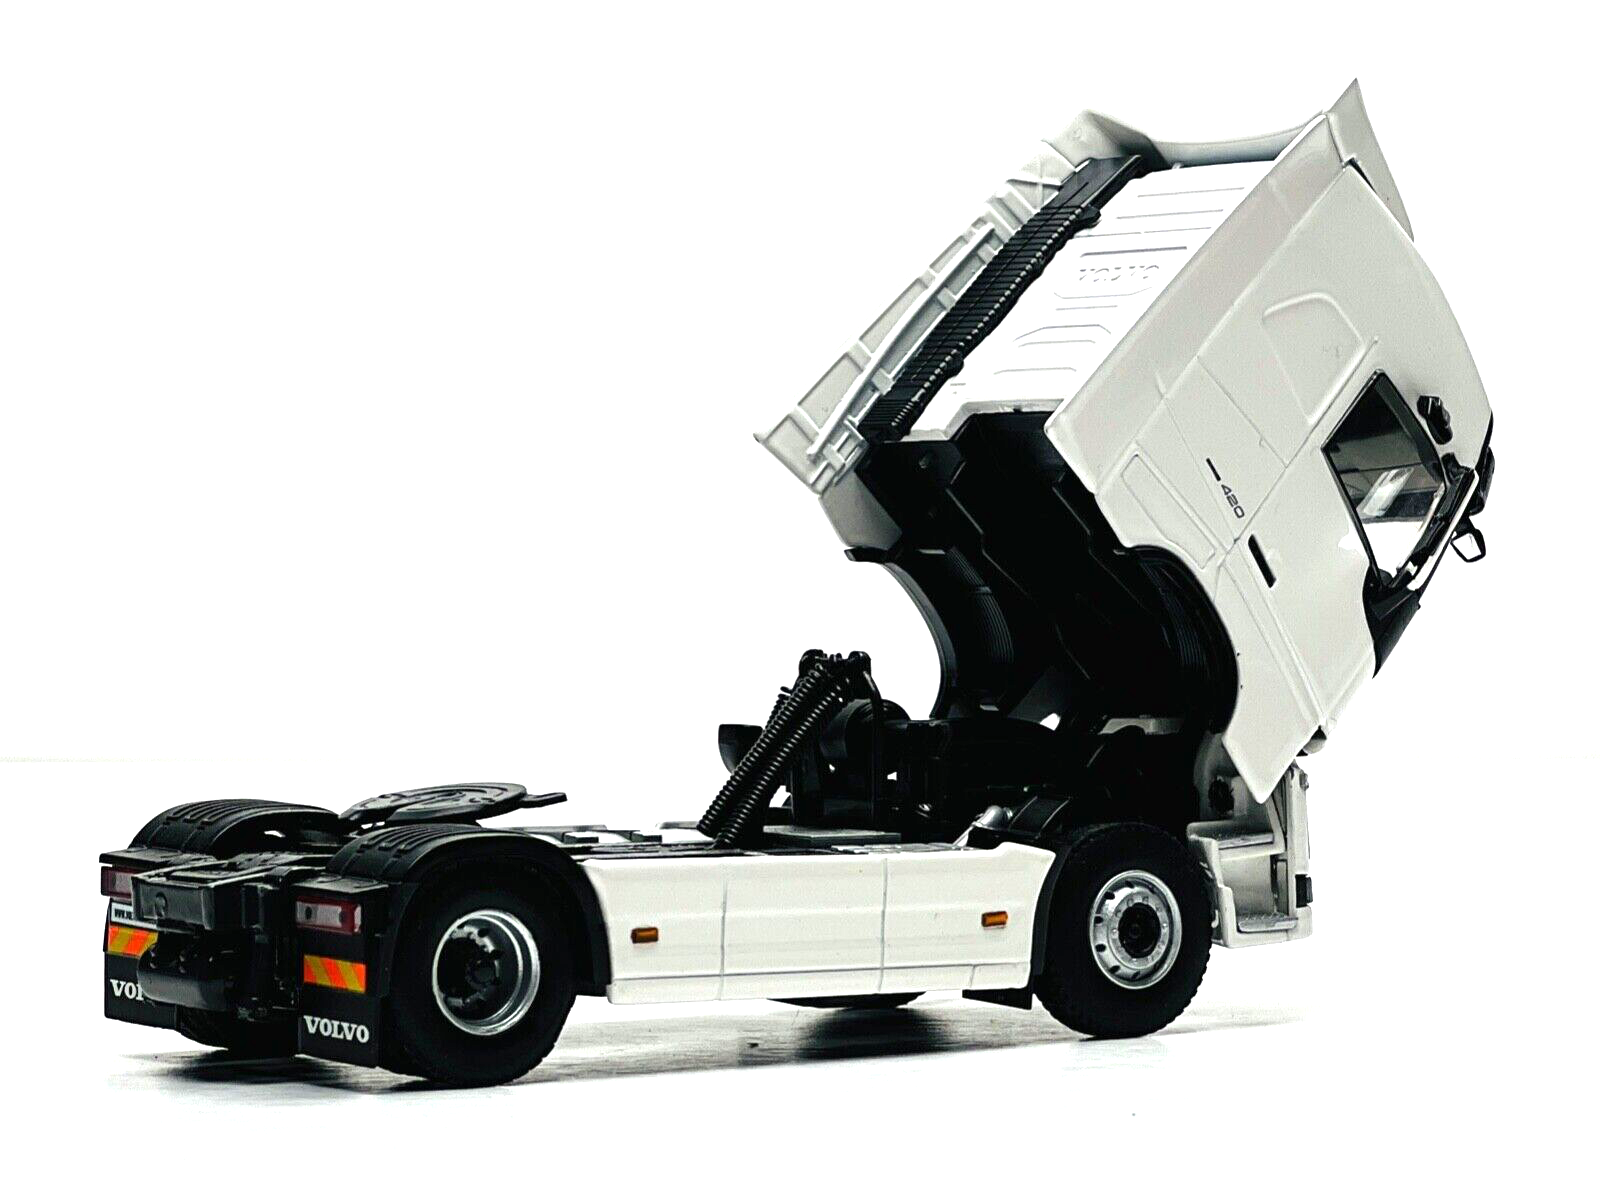 WSI 1/50 SCALE - 03-1136 - VOLVO FH4 GLOBETROTTER WHITE TRACTOR CAB BOXED (56)